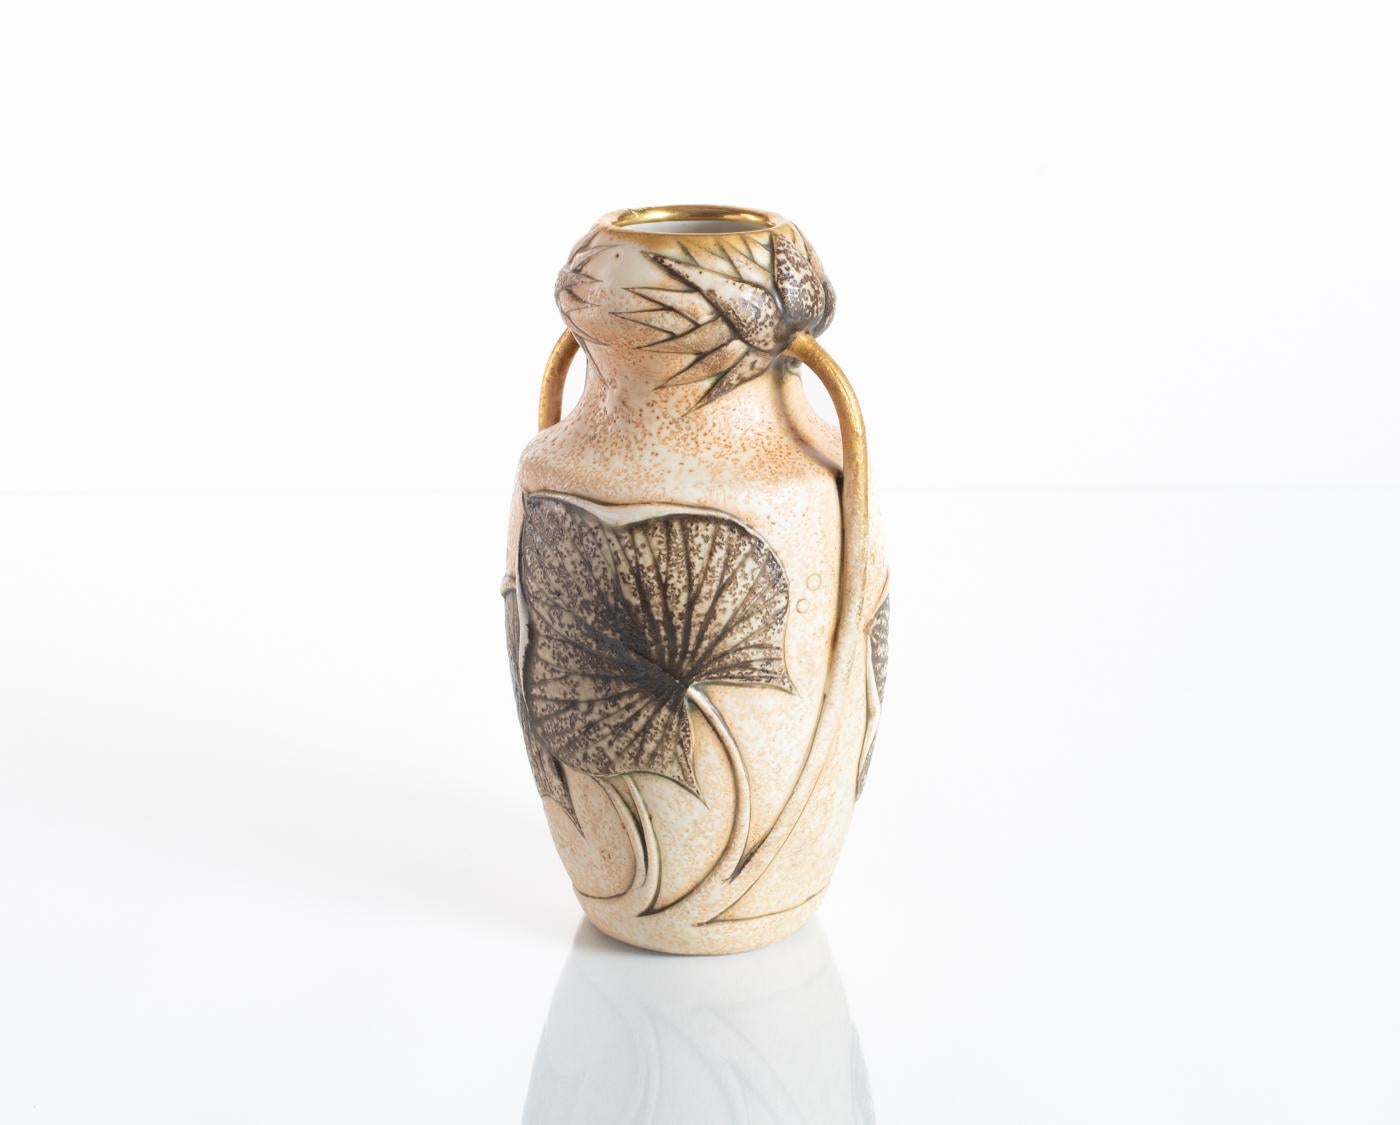 Amphora Vase with Water Lilies by Ernst Wahliss, att. Paul Dachsel, c. 1900 For Sale 1